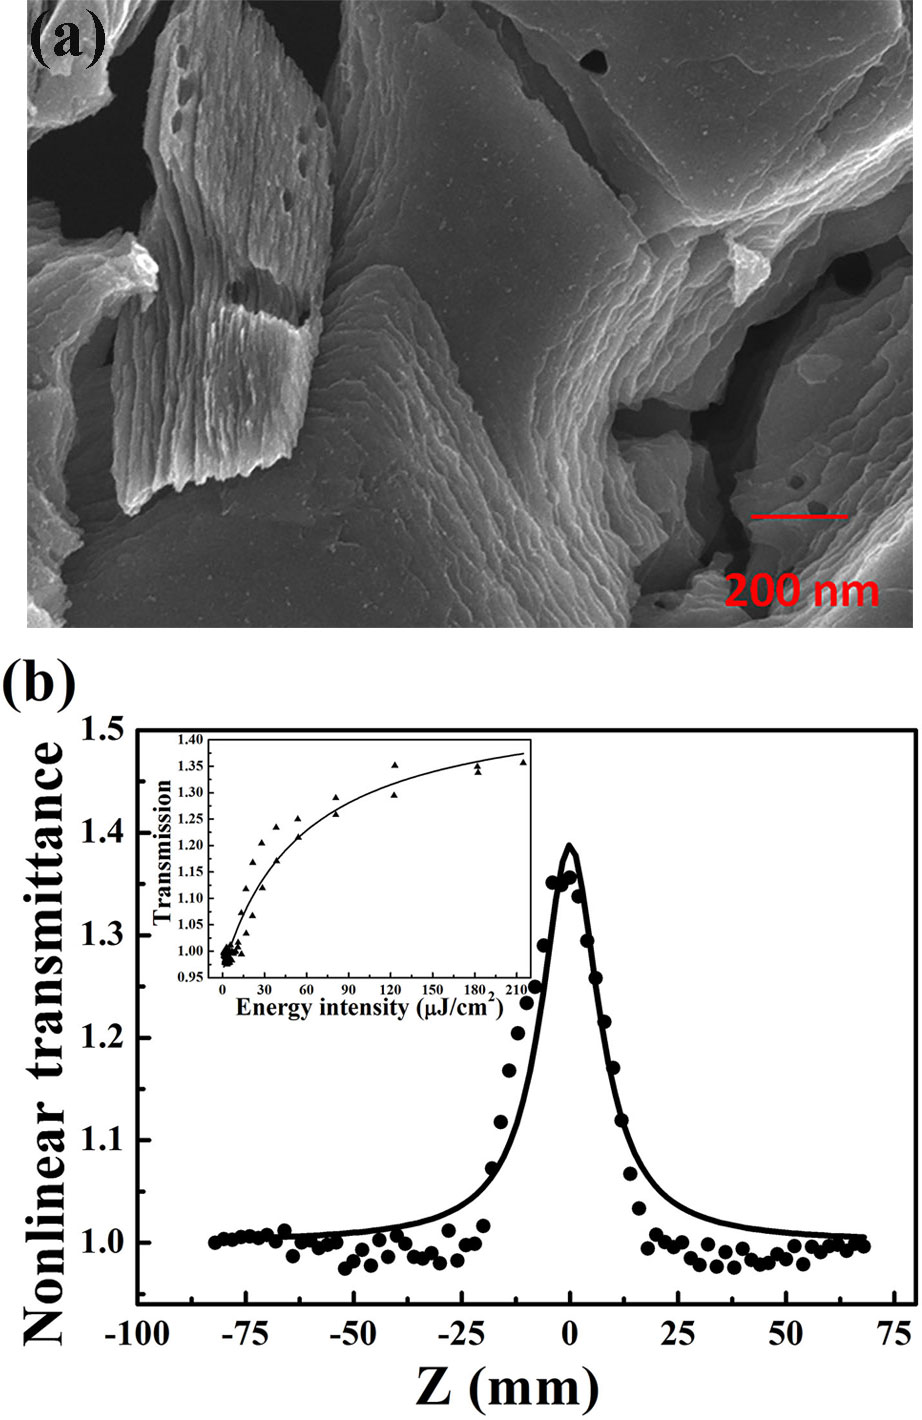 (a) SEM image of MXene Ti3C2Tx, (b) Z-scan curve of MXene Ti3C2Tx, and non-linear transmission versus energy intensity.